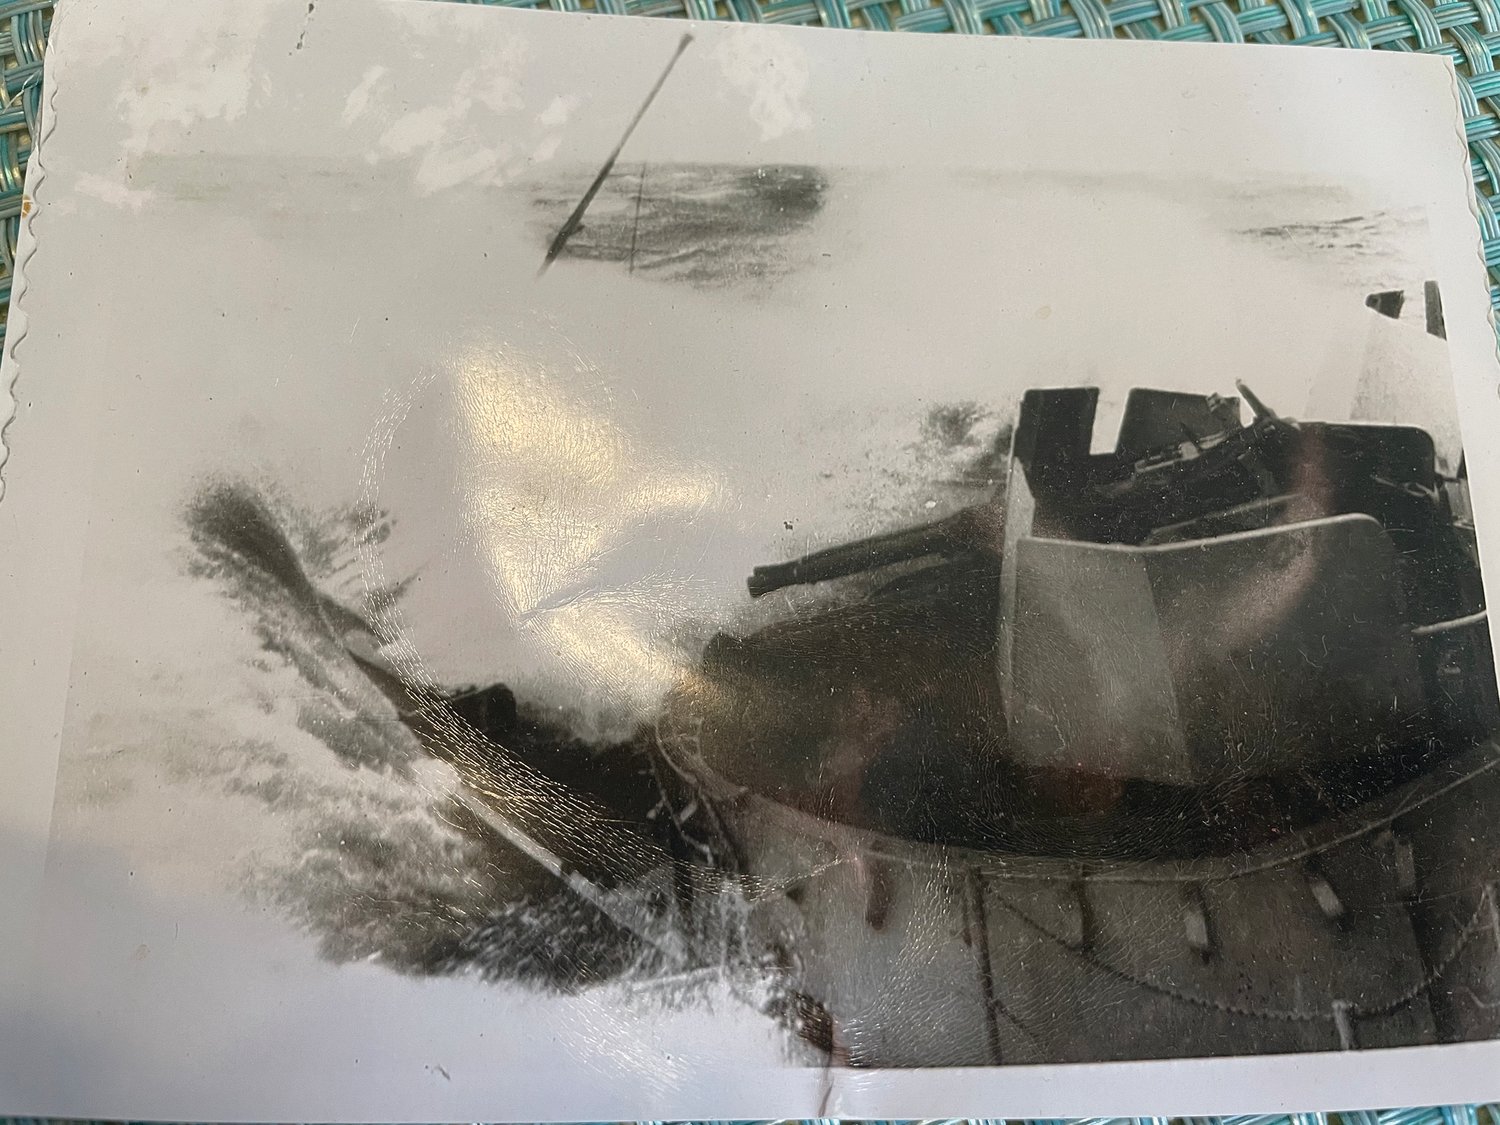 This photo shows the bow of the aircraft carrier Bud Stefanko served on. The storm was so bad the water went right over the deck.